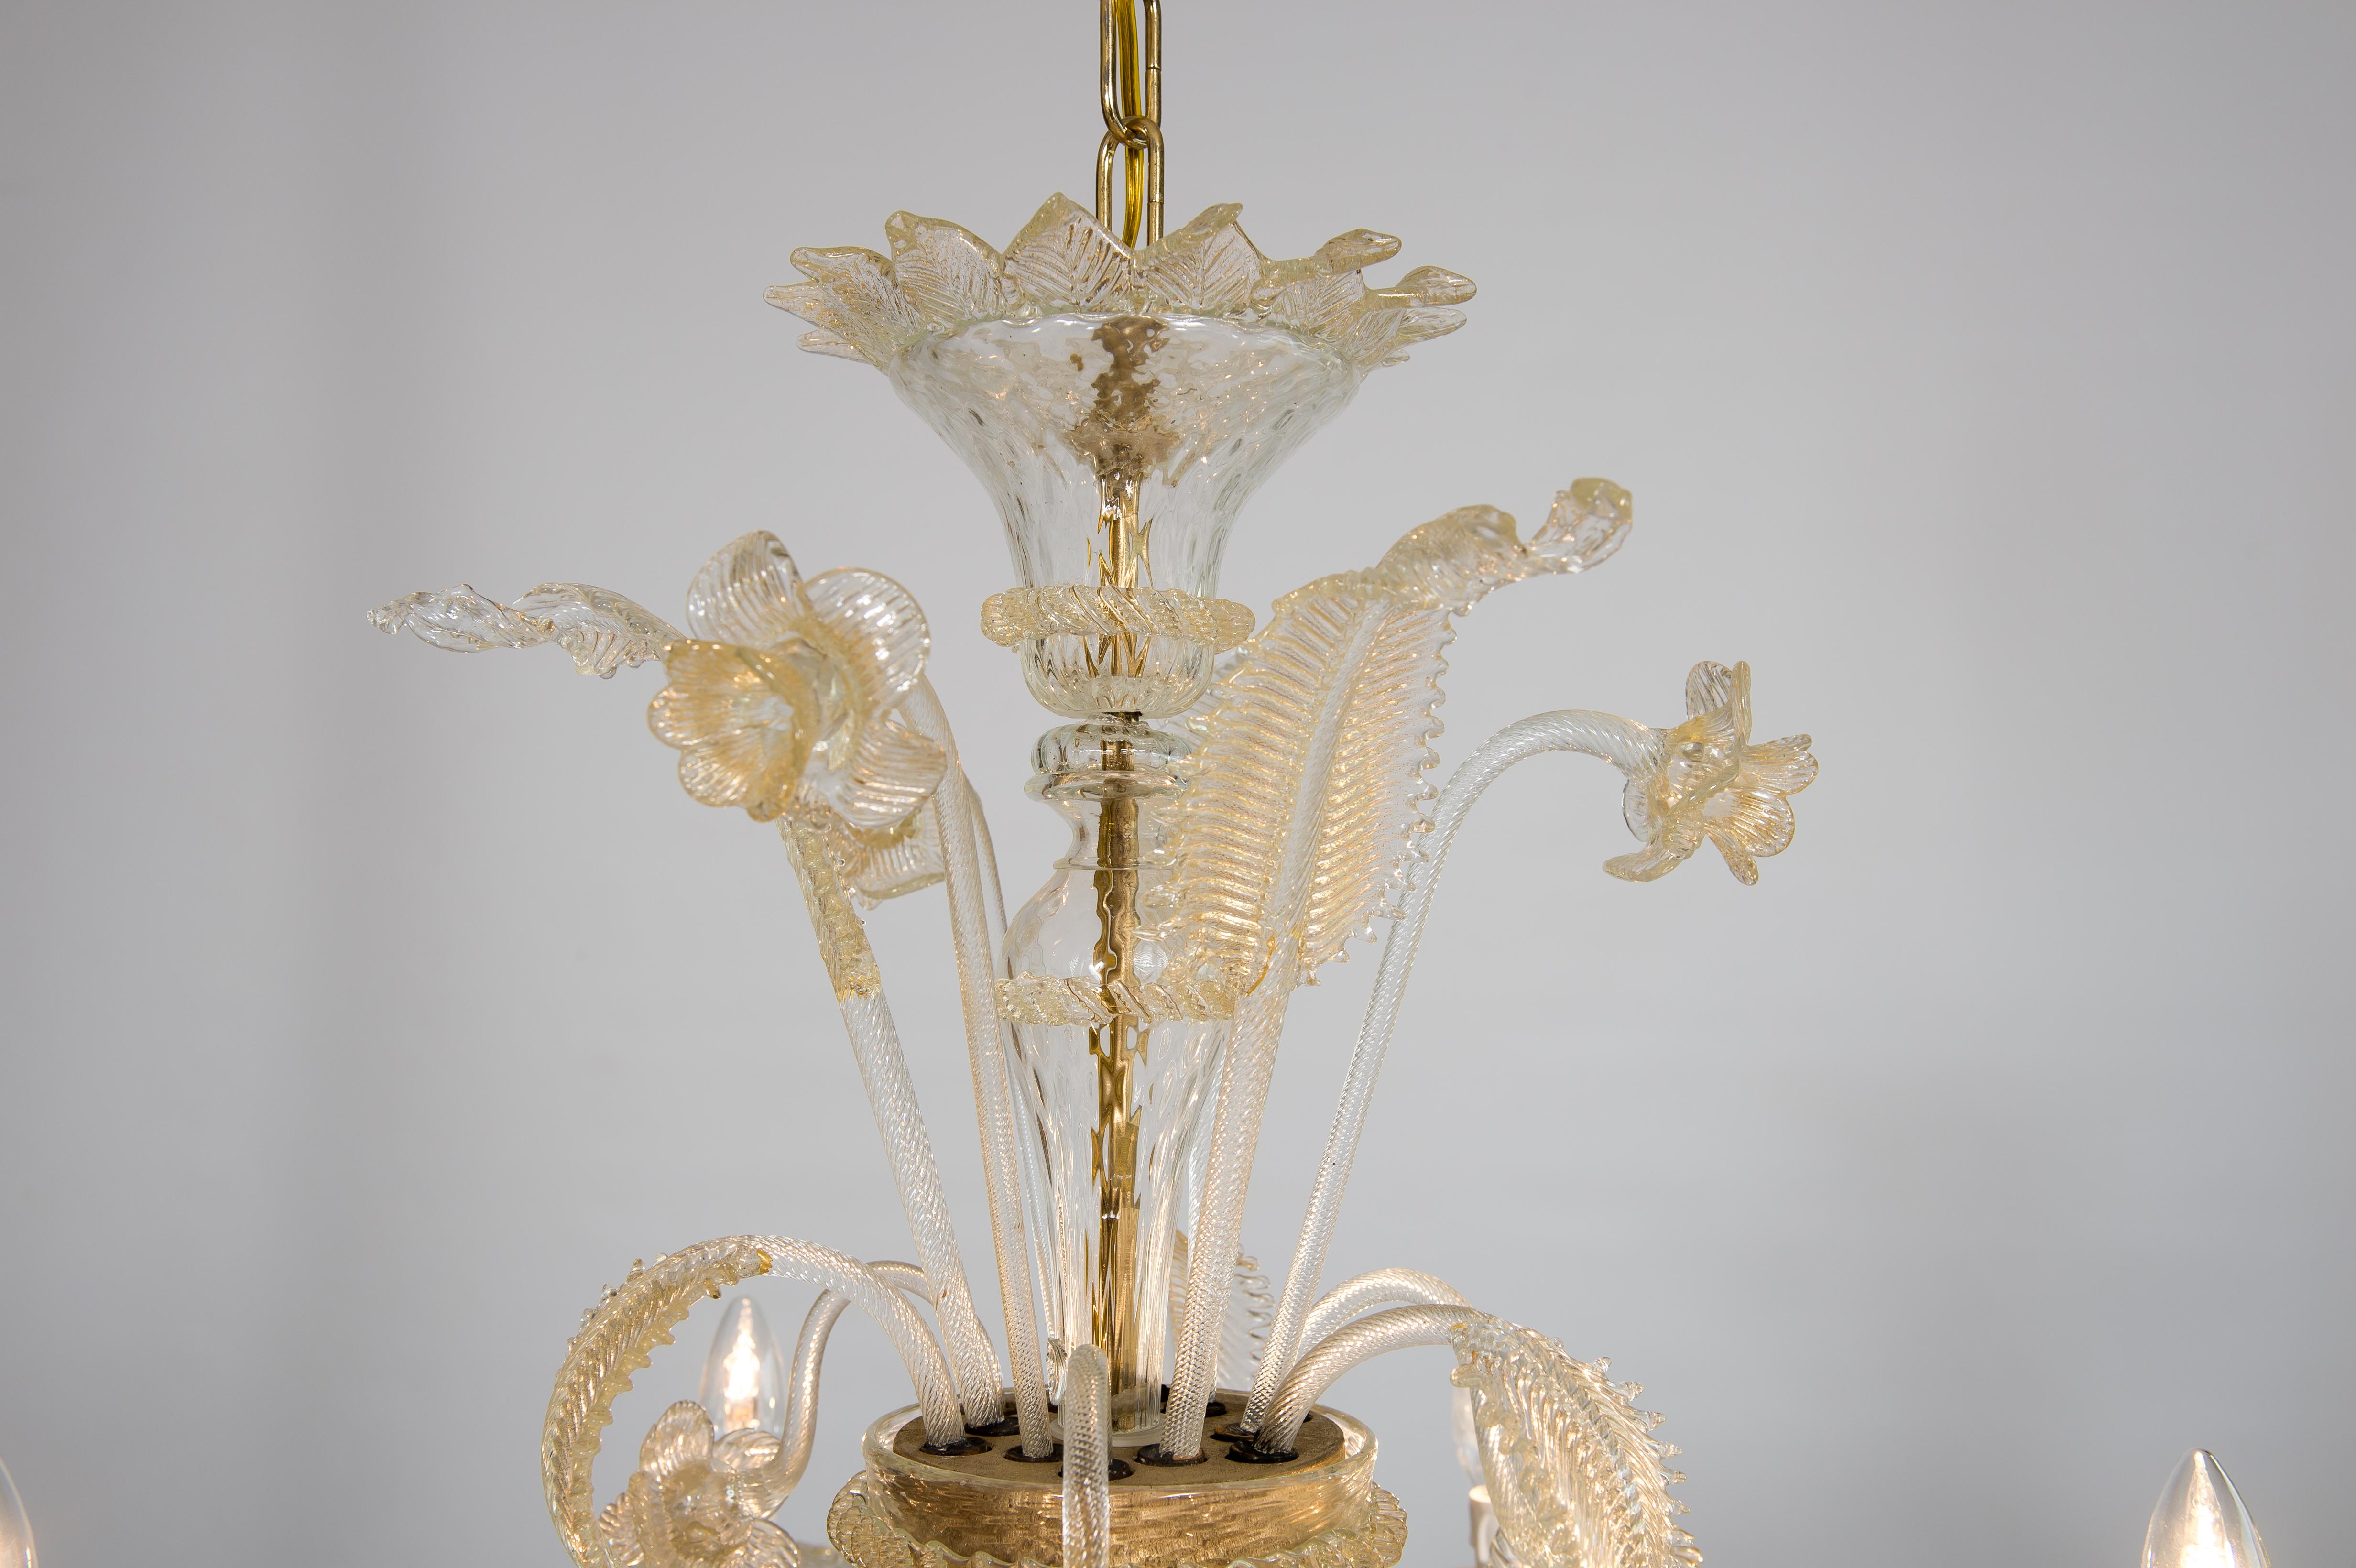 Floral Murano Glass Chandelier with “Riga Dritta” Decorations, 20th Century 12